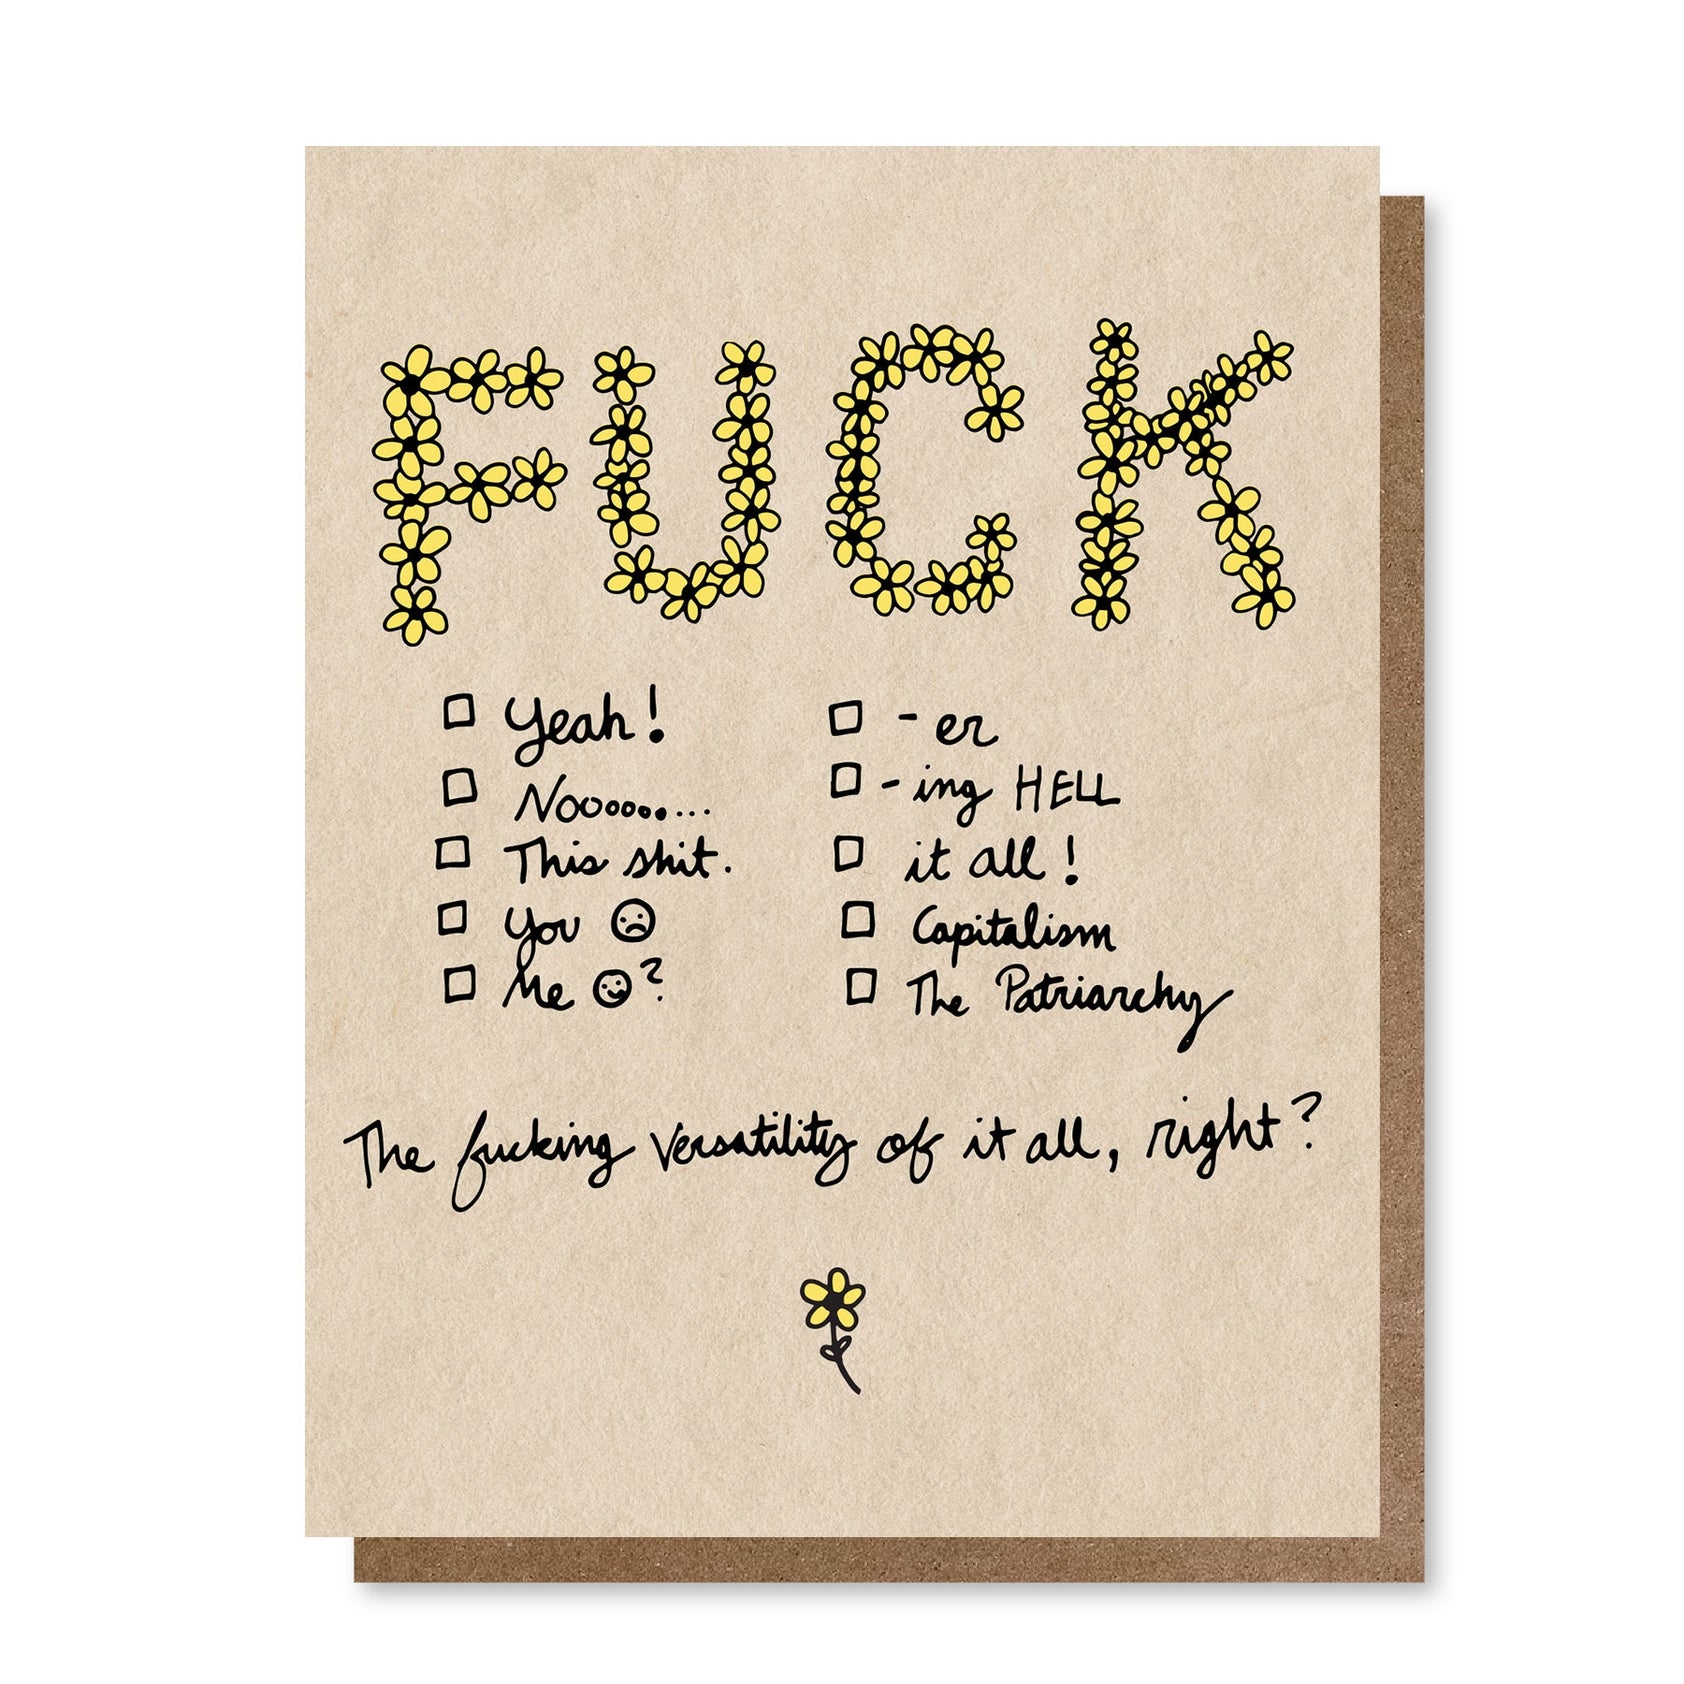 Beige background with image of "fuck" written in yellow flowers text and checkboxes with black text "Yeah, Noooo, This shit, You, Me, er, ing hell, it all!, capitalism, the patriarchy, The fucking versatility of it all right?". Kraft envelope included.